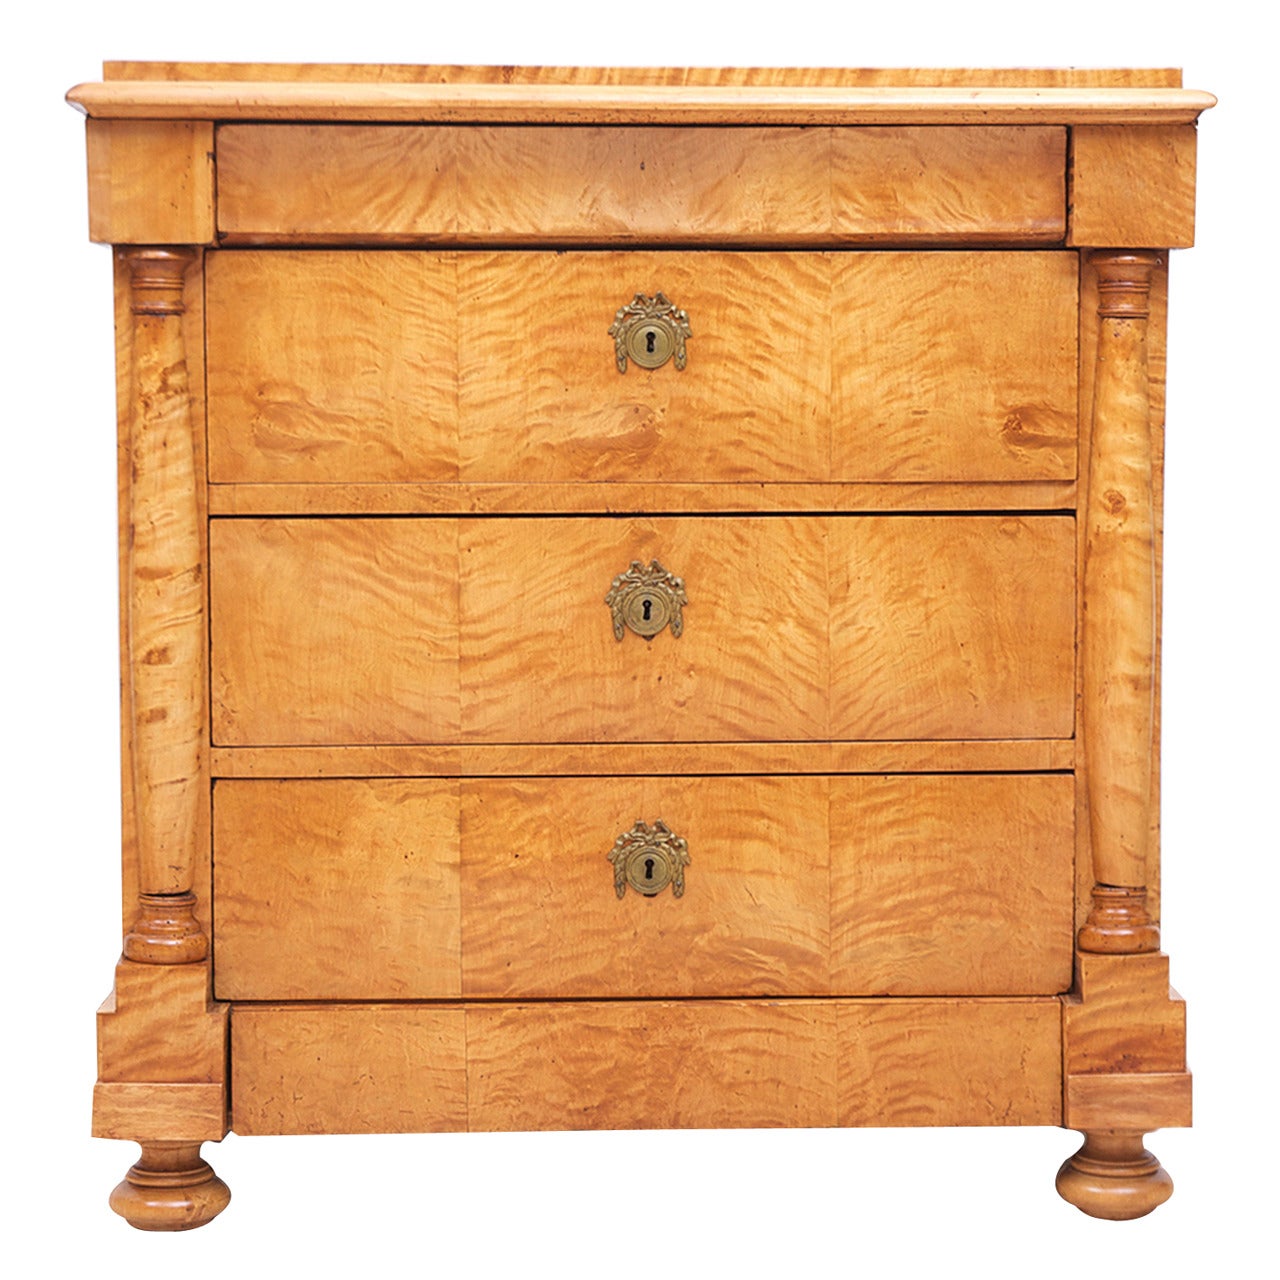 A very handsome and small Swedish Biedermeier chest of drawers in book-matched quilted birch that is of a golden honey-color. Offers a total of five drawers, with three flanked by turned pilasters and two that are somewhat secret as they form part